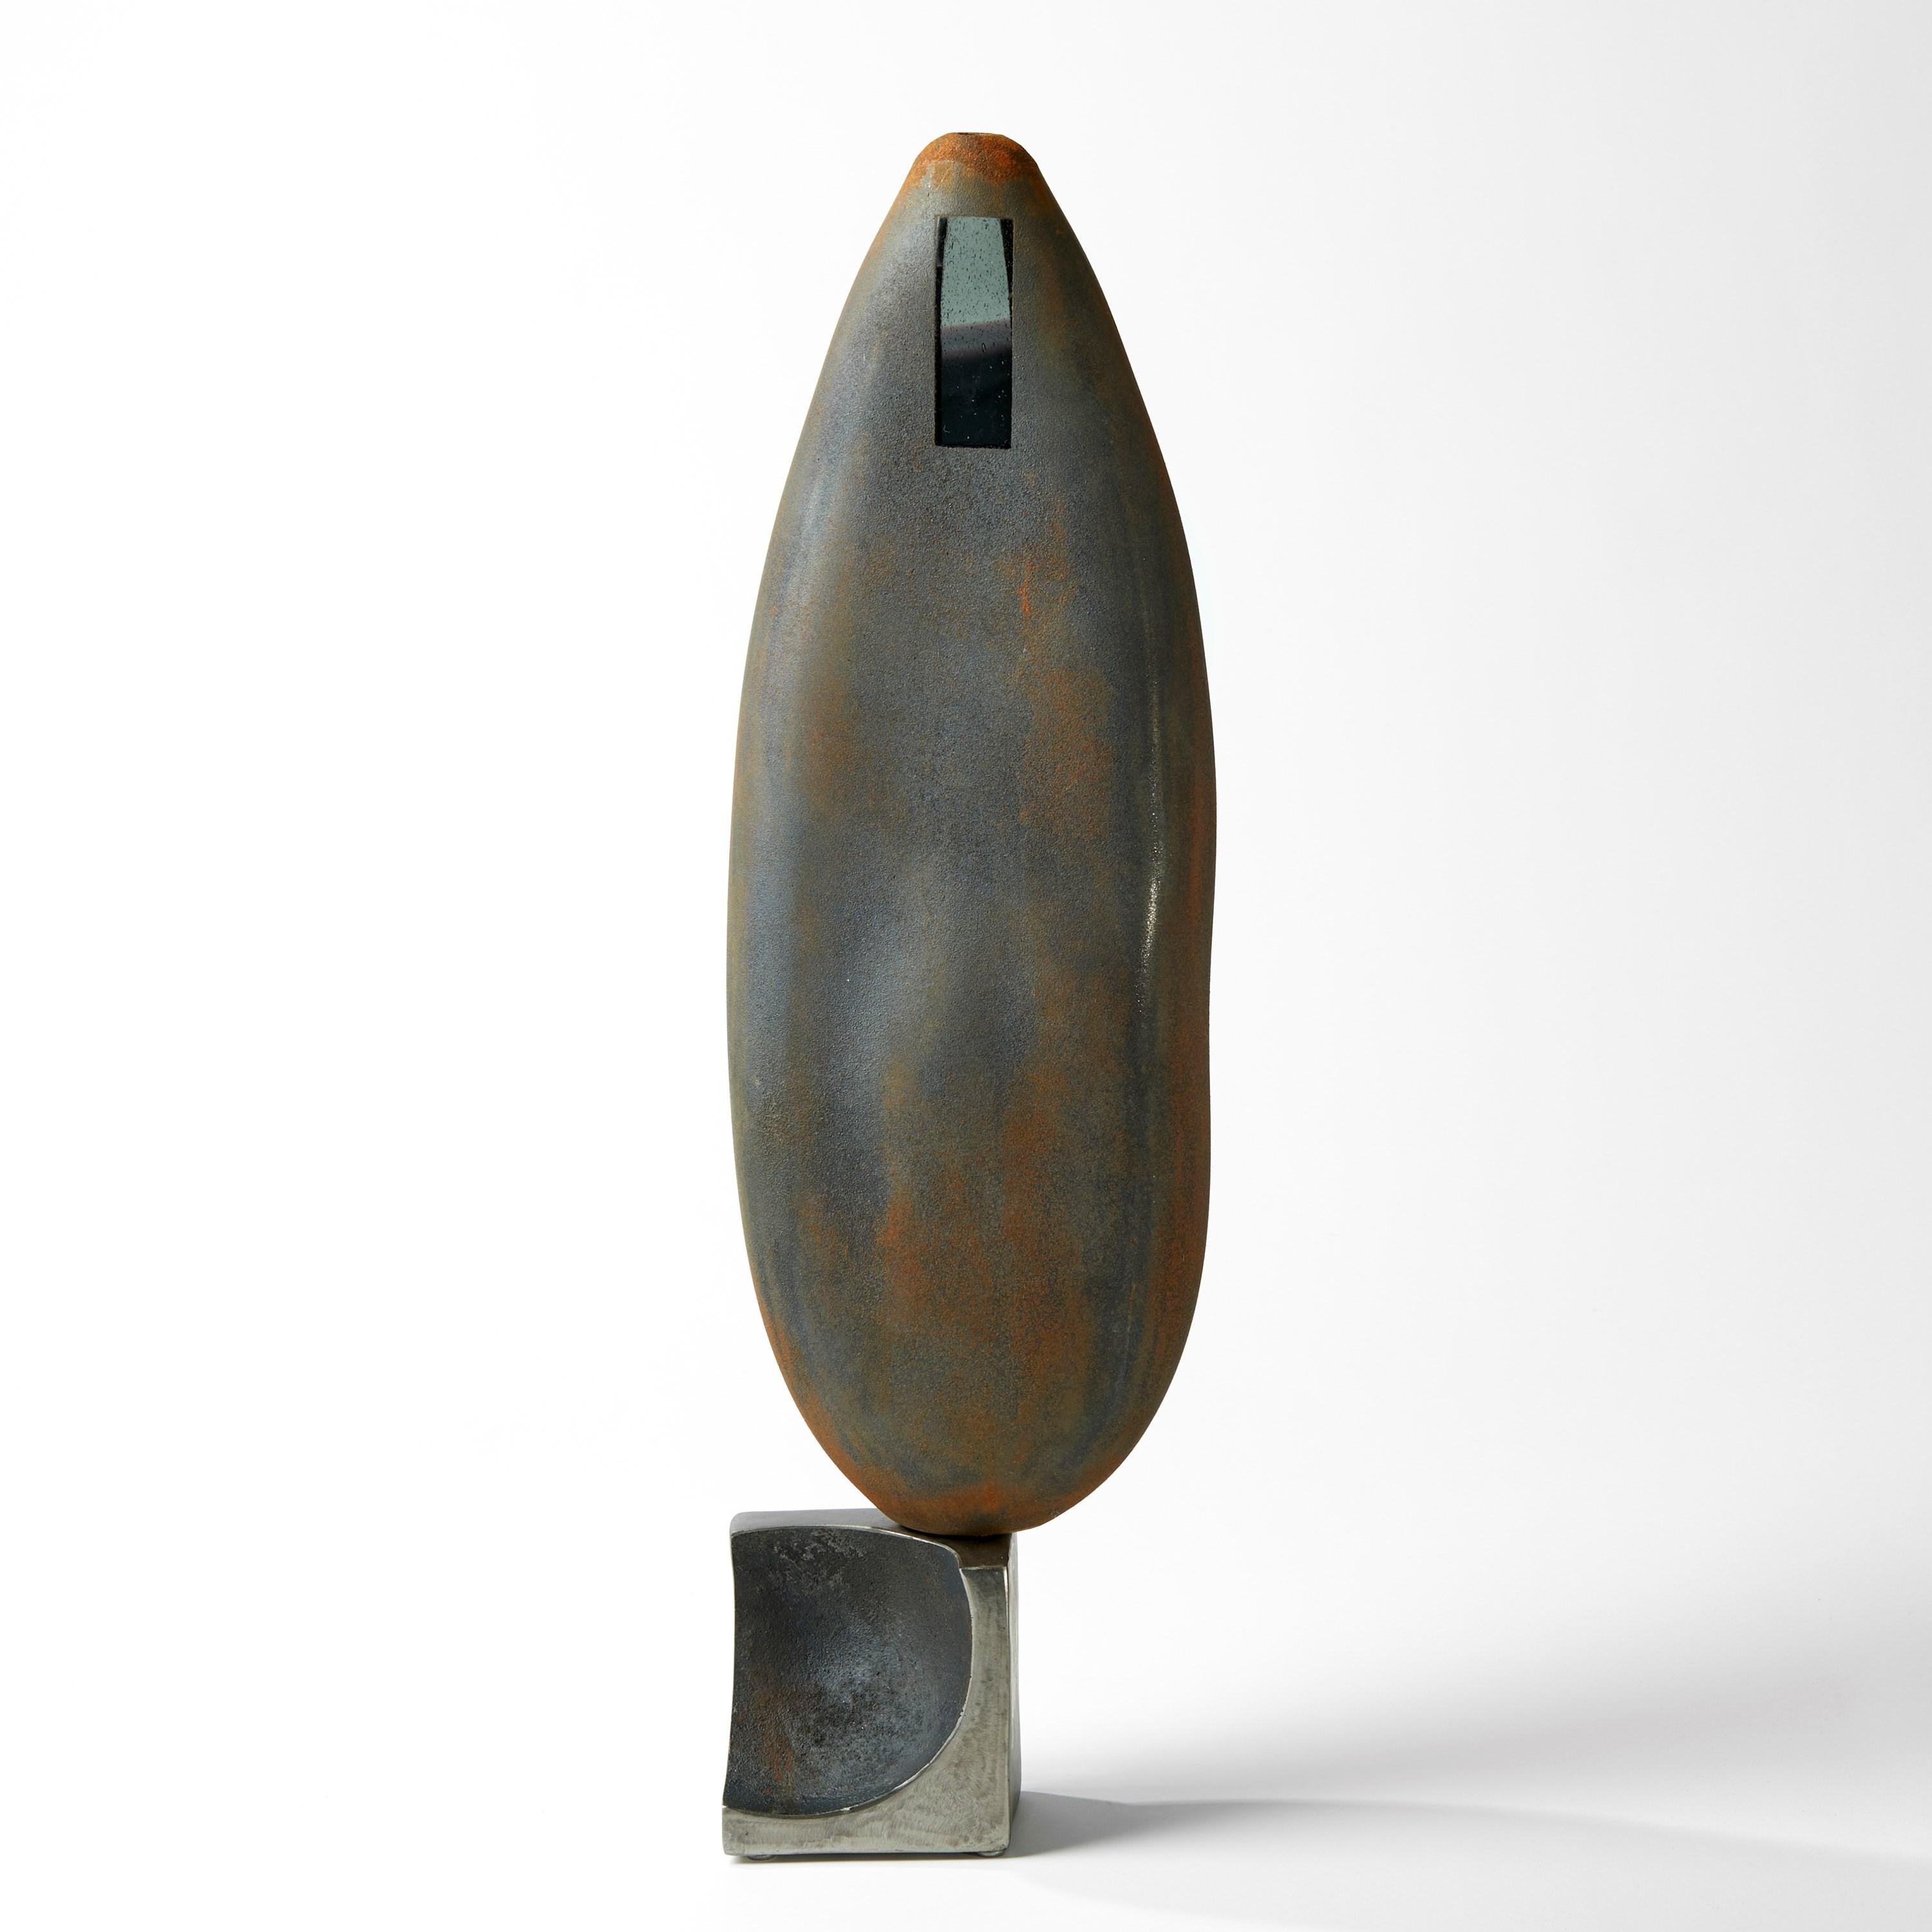 'Apertura Stone Grey 07' is a unique sculpture by the British artist, Jon Lewis, created from handblown television glass, cast iron and steel.

The top section is held in place upon the metal base below by a strong magnet.

These blown glass